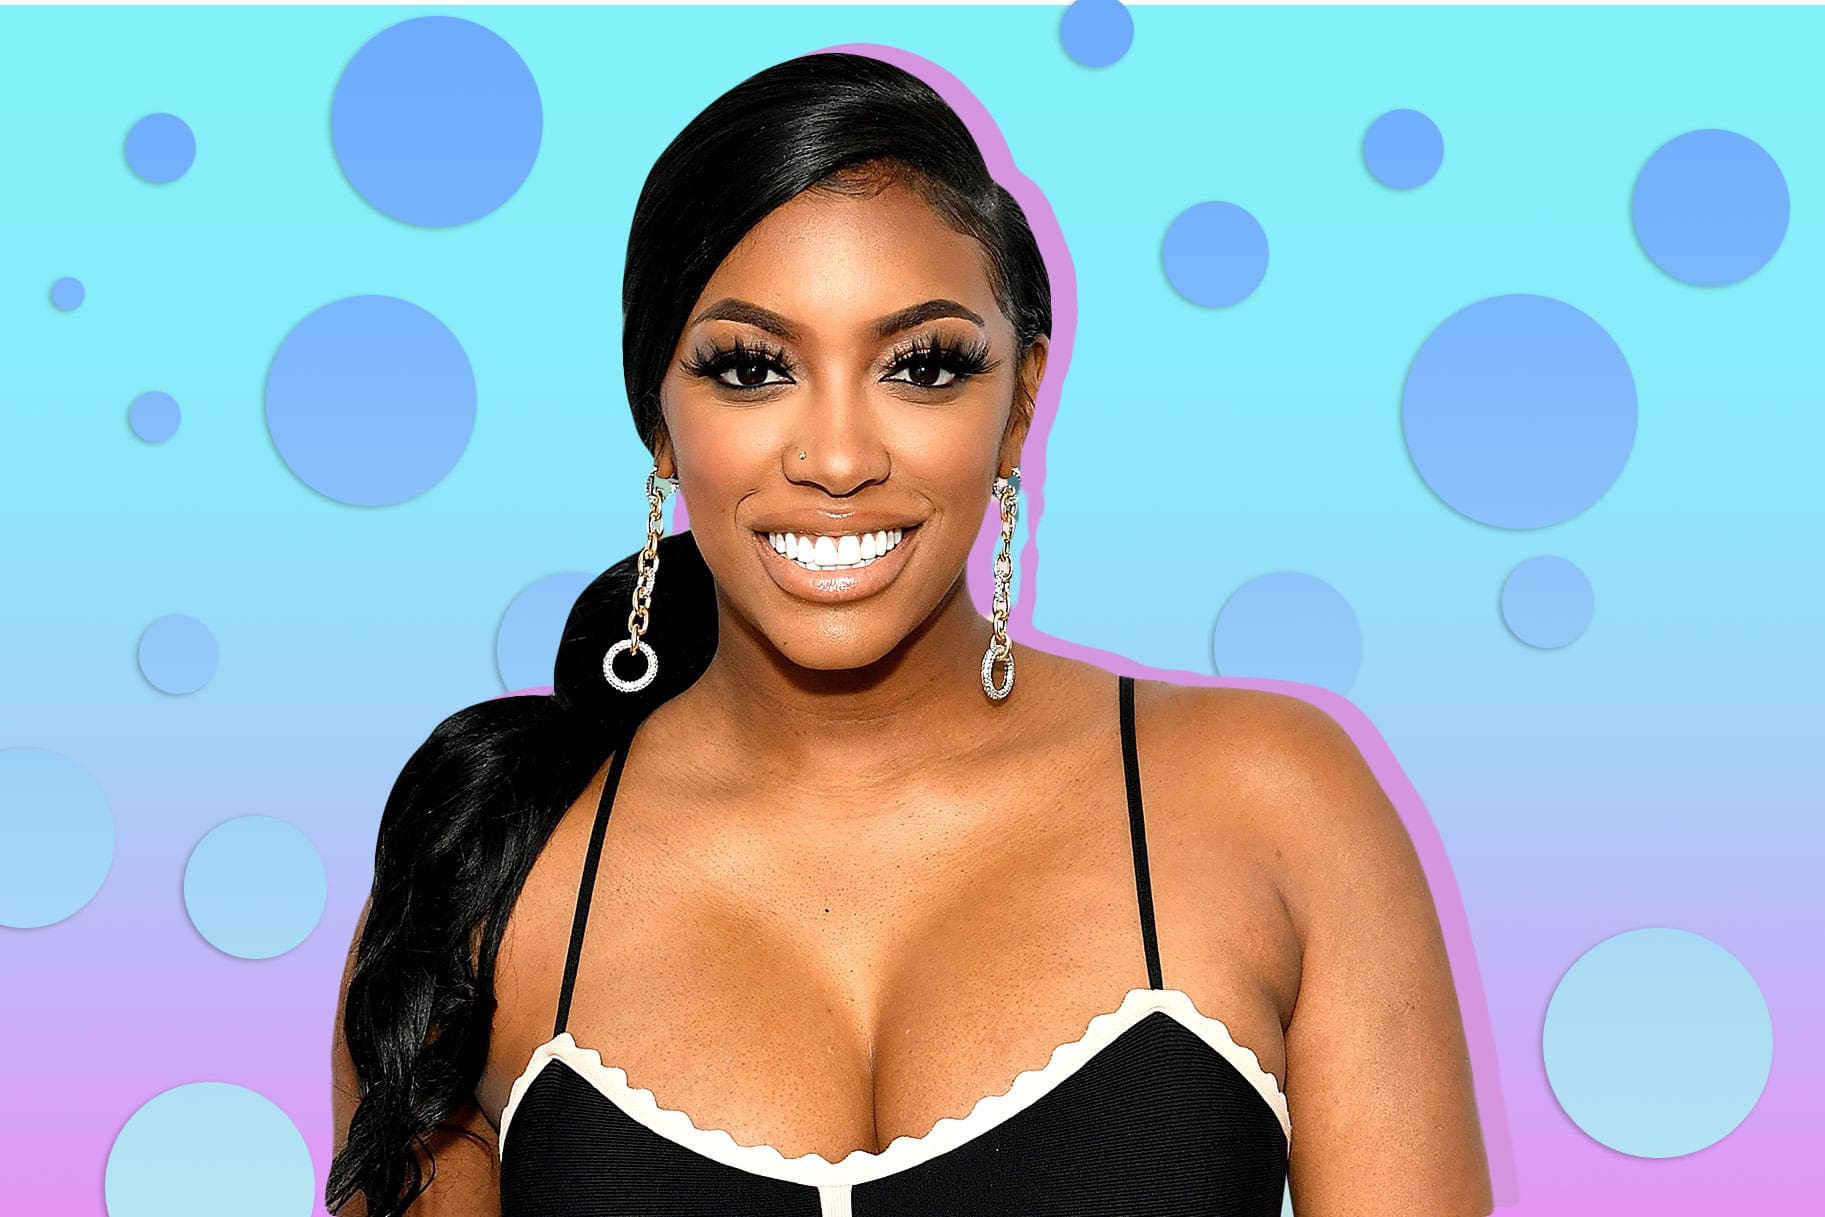 Porsha Williams Tries A No Cat Eye For A Fresher Look - Fans Notice She Lost More Weight